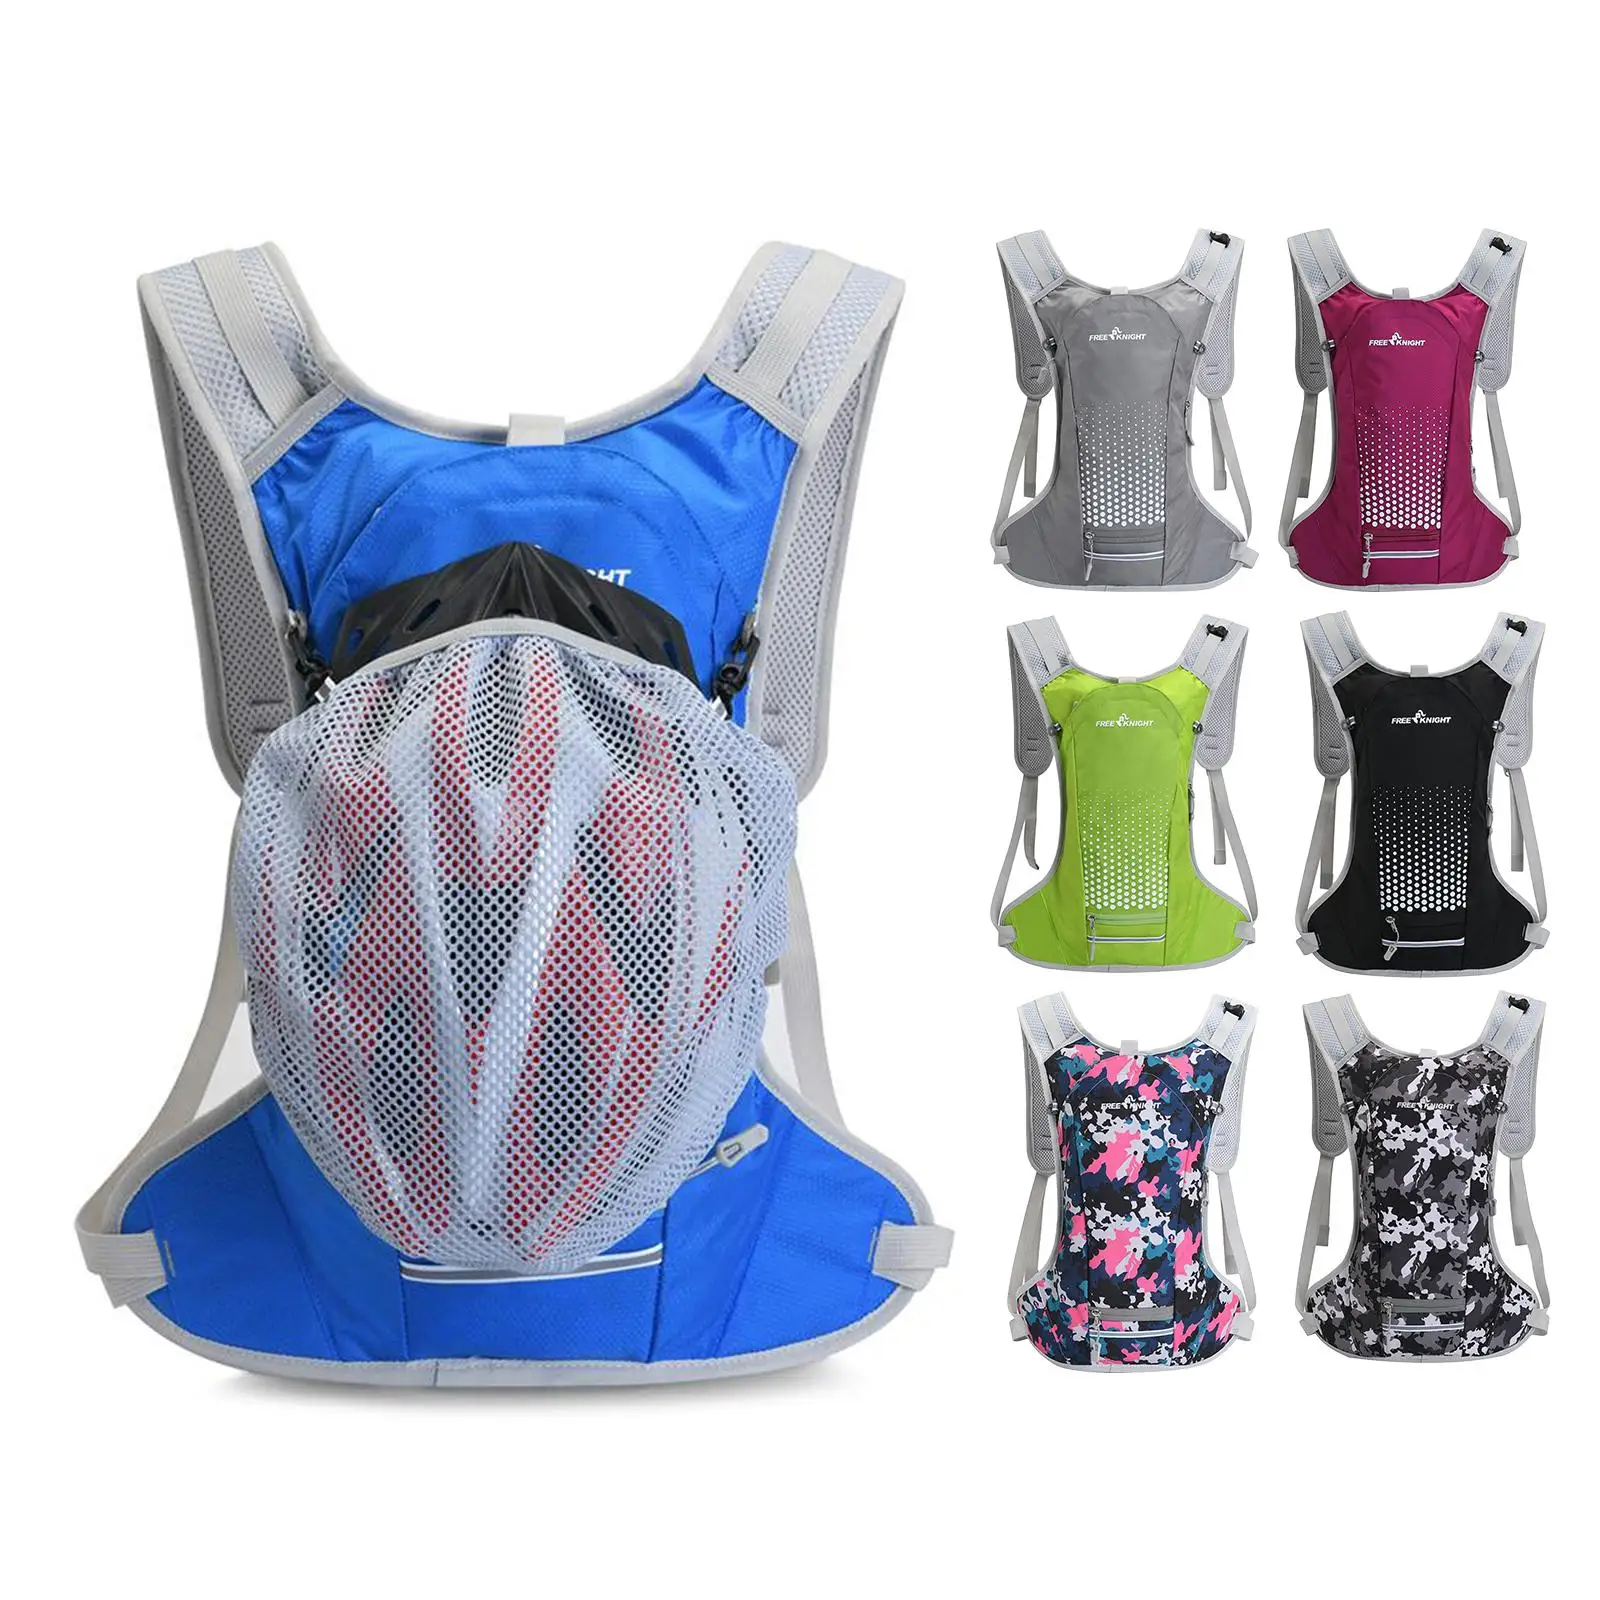  Backpack Running Backpack Sports Backpack for Biking Riding Hiking Camping